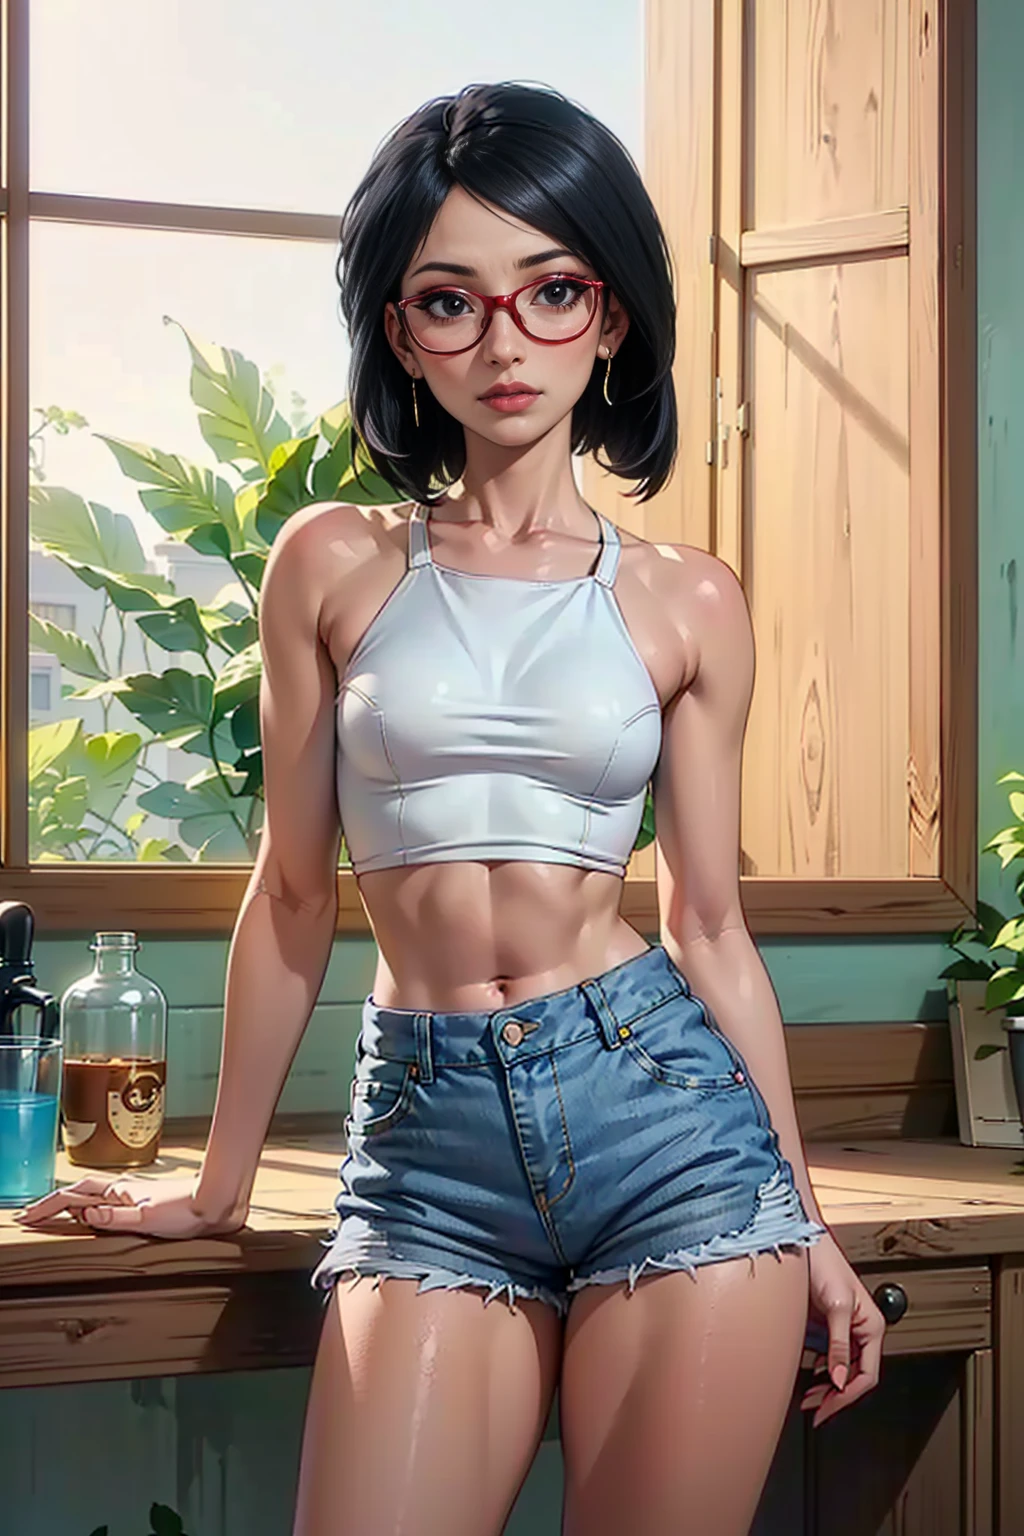 (1girl, Alone, alone), (WakatsukiRisa, Sarada uchiha, black hair, short hair, Black eyes, (small bust), red glasses), ((Alone, (1woman,pink lipstick, Black eyes), extremely detailed , Soft ambient lighting, 4K, perfect eyes, a perfect face, Perfect Lighting, the 1 girl)), ((fitness, , shapely body, athletic body, toned body)) , ((denim shorts, white tank top, window in the background, plants, garden, leaves, tree, bushes, flowers, wood))